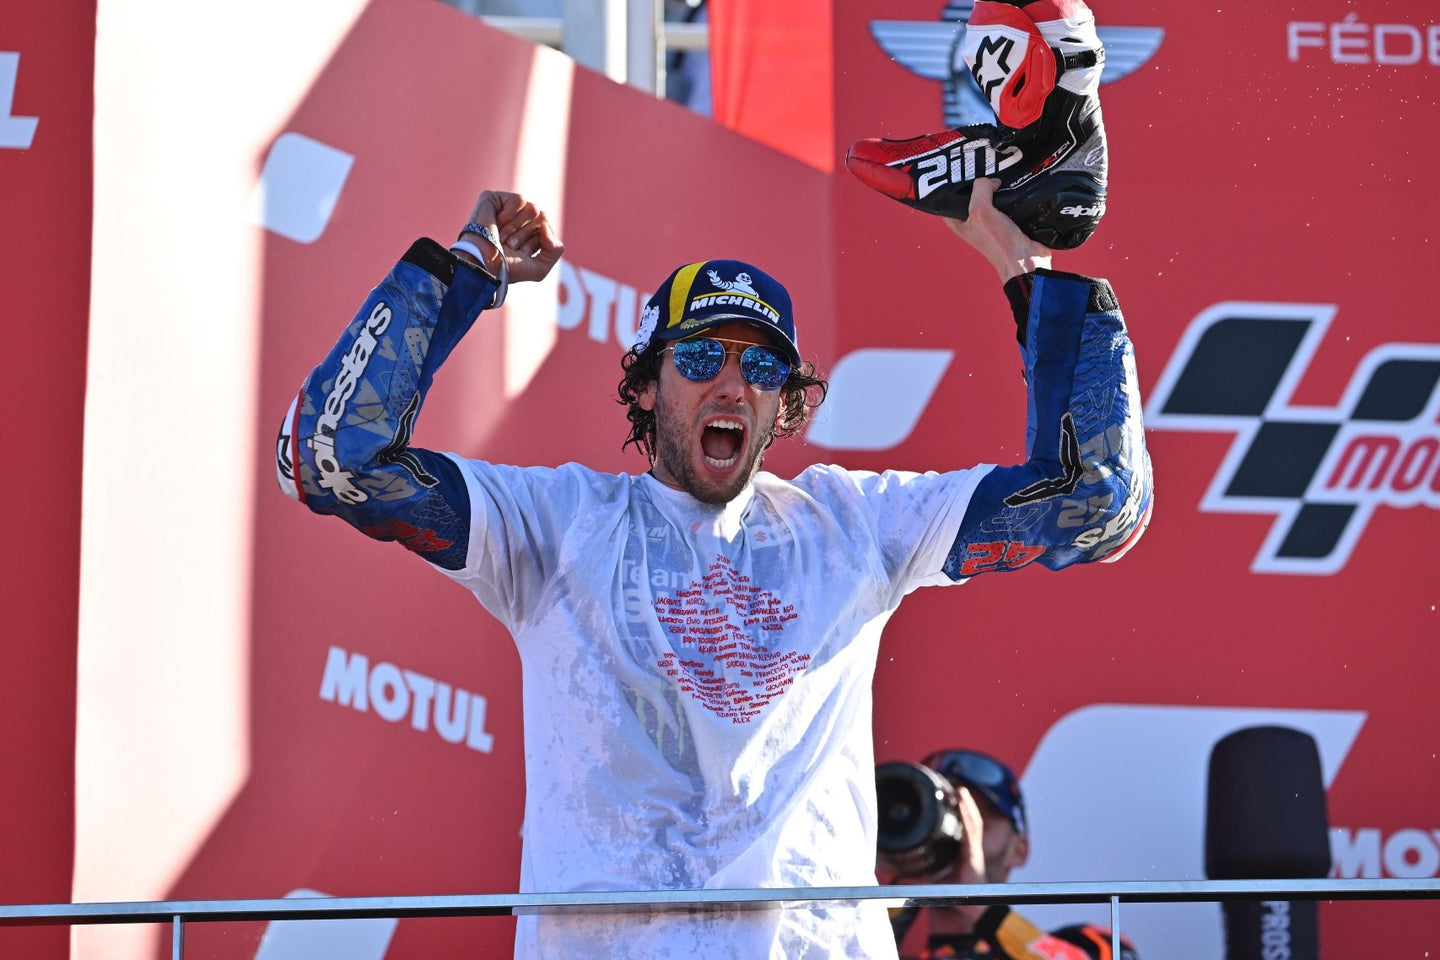 ALEX RINS WINS FINAL MOTOGP RACE OF THE YEAR AS ALPINESTARS SCORE DOUBLE-PODIUM FINISH WITH JORGE MARTIN THIRD AT THEIR HOME RACE IN VALENCIA